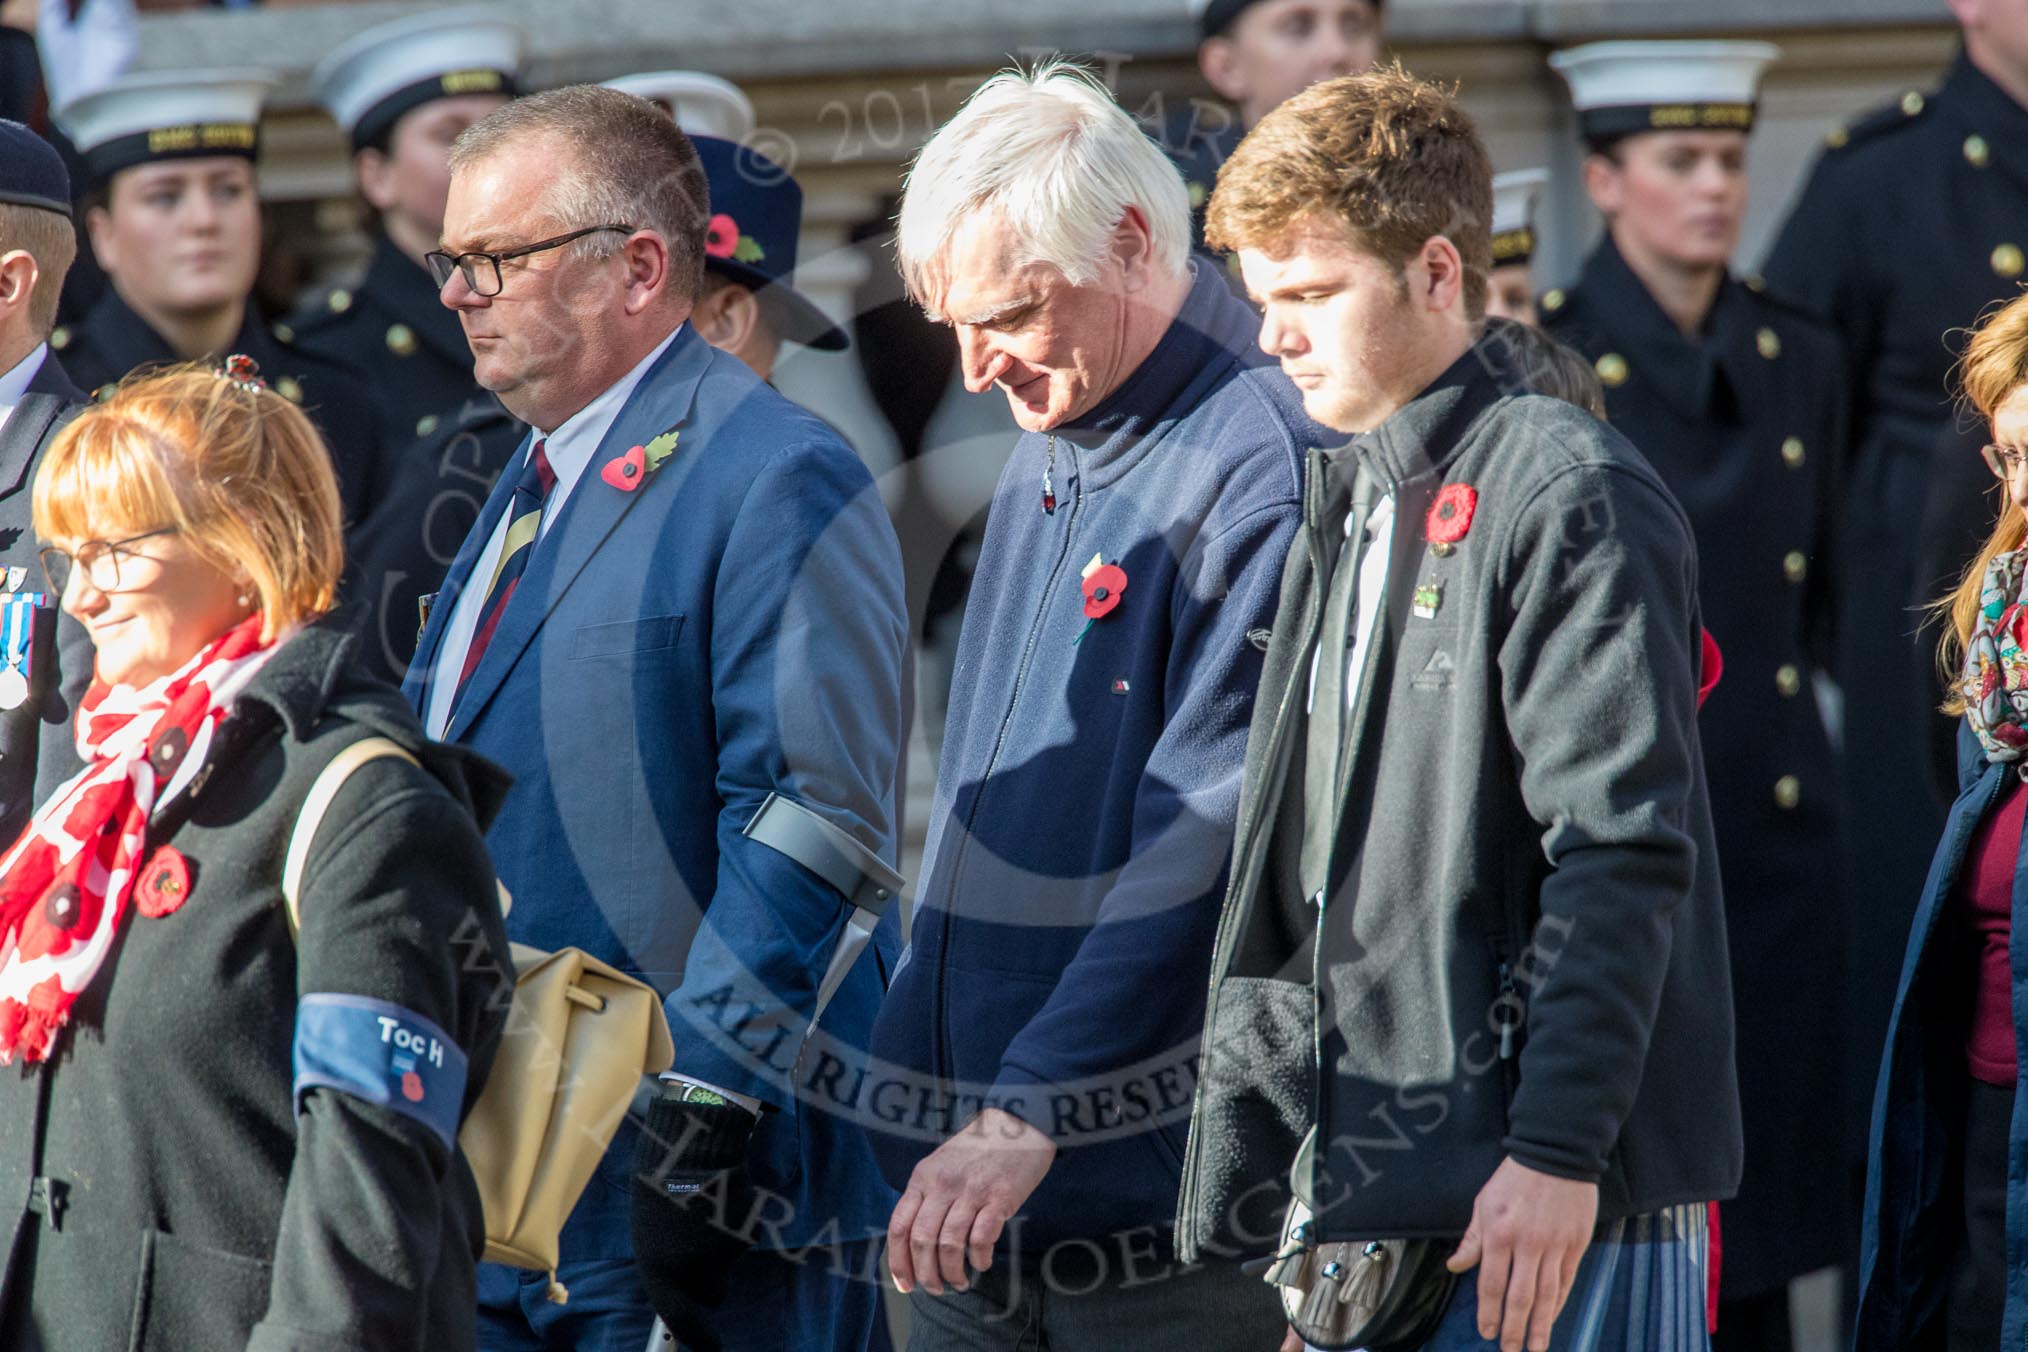 Toc H (Group M5, 18 members) during the Royal British Legion March Past on Remembrance Sunday at the Cenotaph, Whitehall, Westminster, London, 11 November 2018, 12:25.